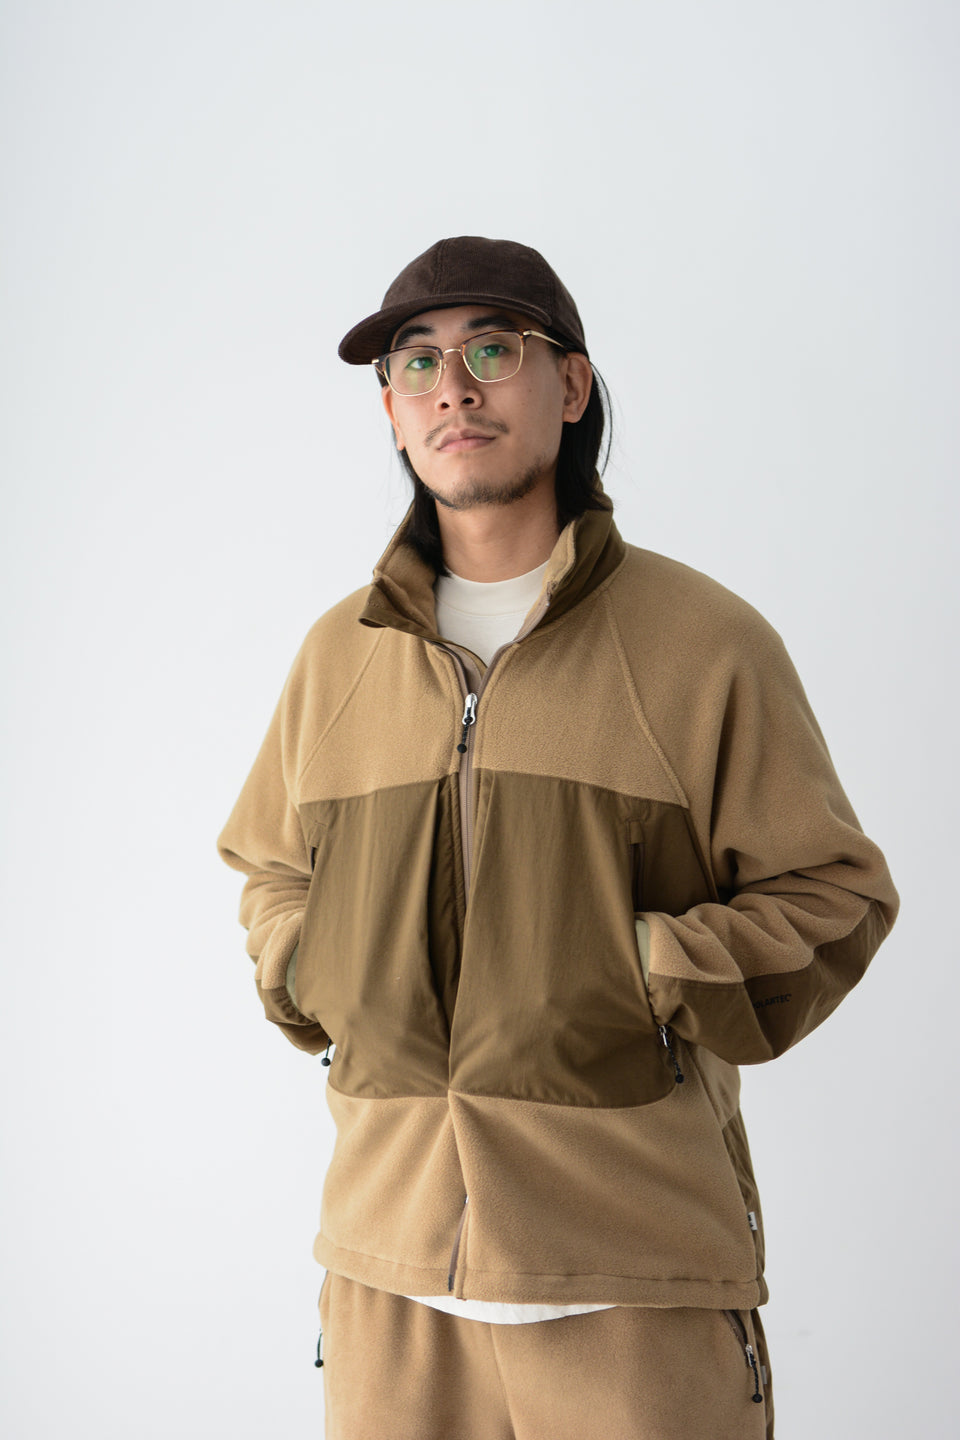 ENDS and MEANS Japan AW21 FW21 Tactical Fleece Zip Jacket Brown Beige Calculus Victoria BC Canada